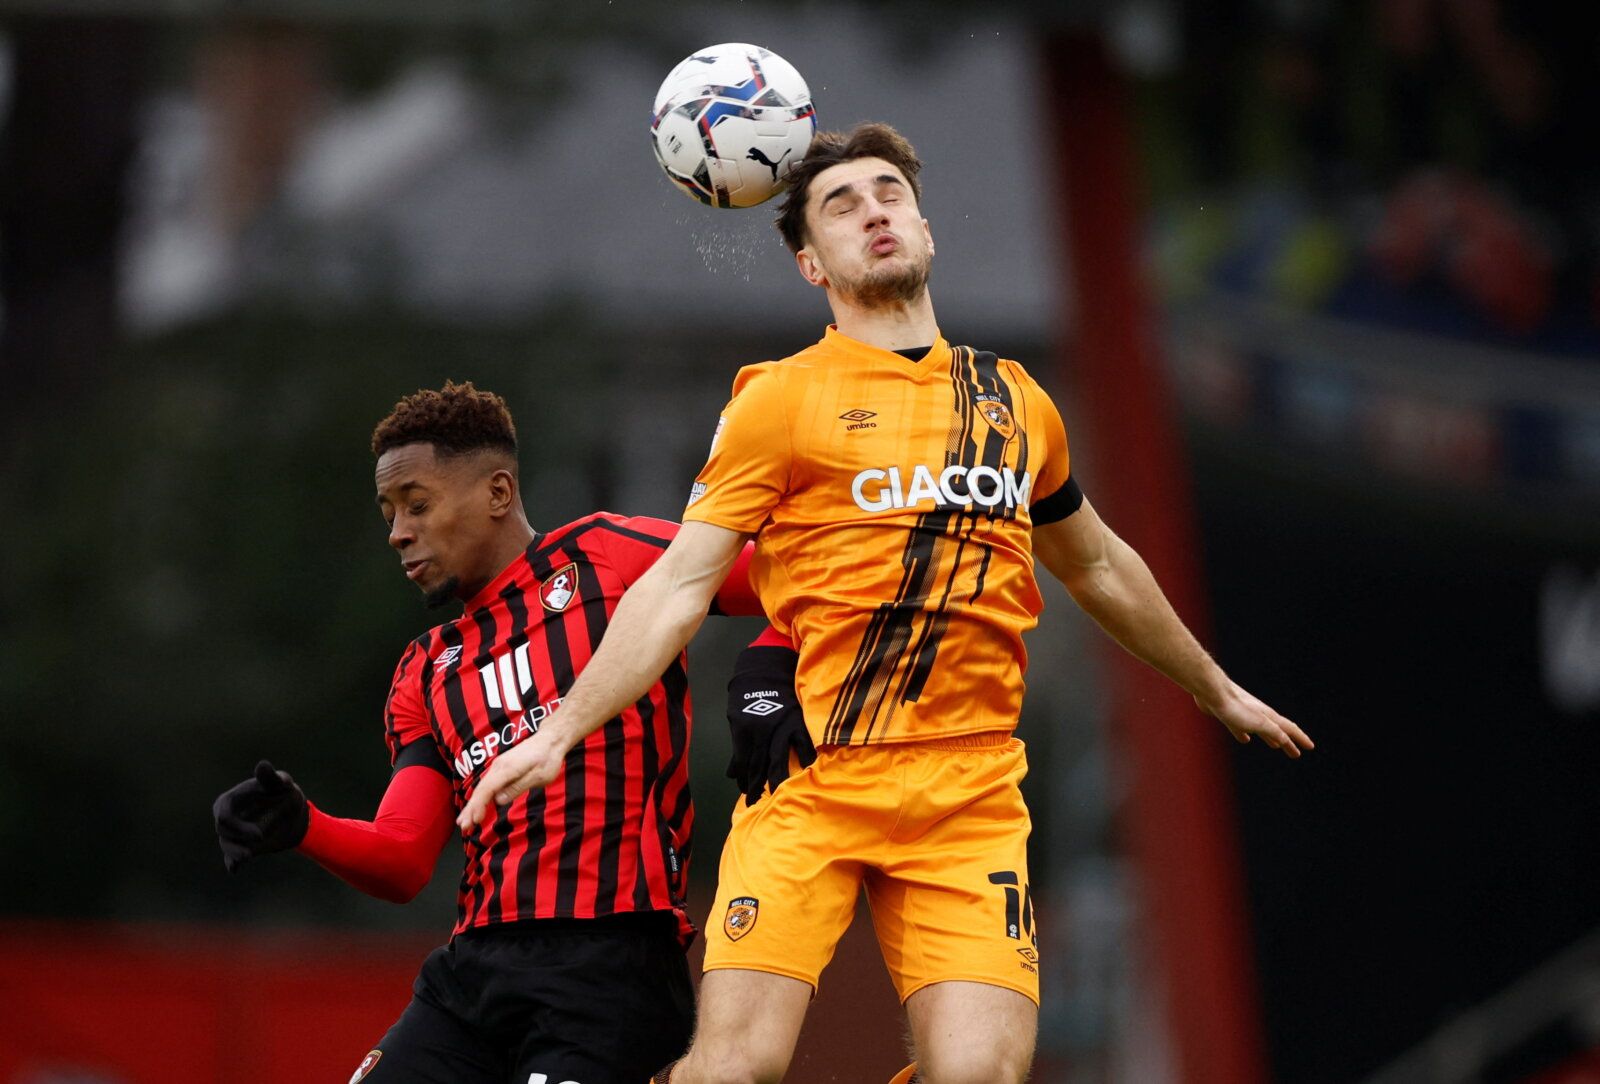 Soccer Football - Championship - AFC Bournemouth v Hull City - Vitality Stadium, Bournemouth, Britain - January 22, 2022 Bournemouth's Jamal Lowe in action with Hull City's Ryan Longman  Action Images/John Sibley  EDITORIAL USE ONLY. No use with unauthorized audio, video, data, fixture lists, club/league logos or 